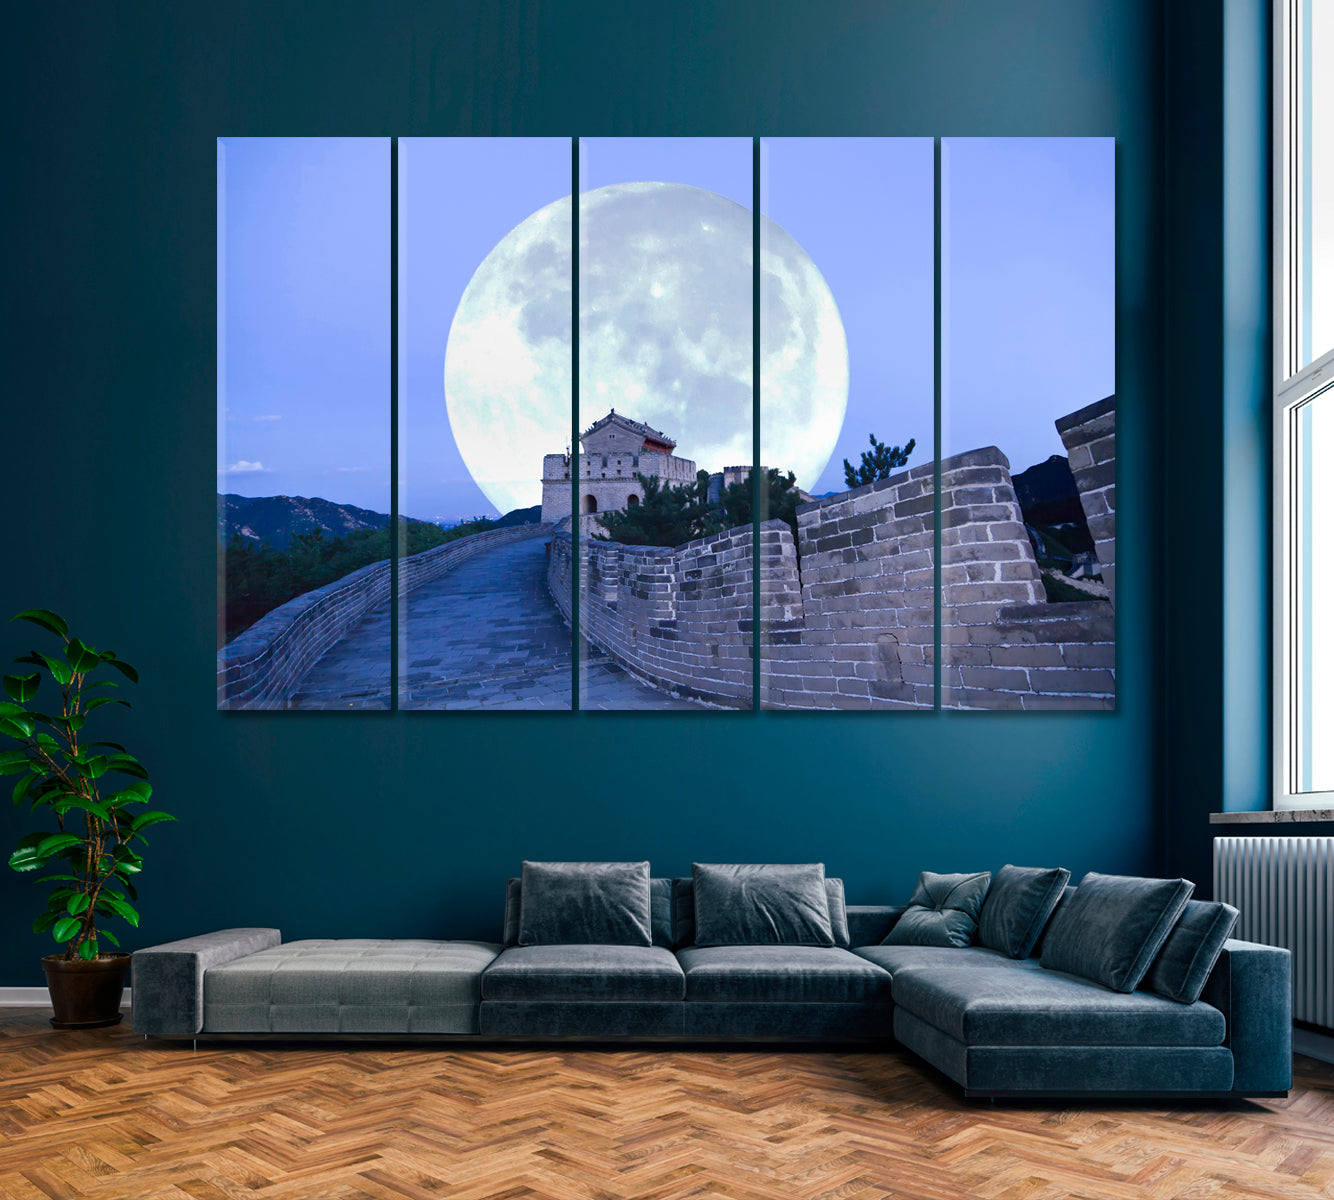 Badaling Great Wall with Full Moon Canvas Print ArtLexy 5 Panels 36"x24" inches 